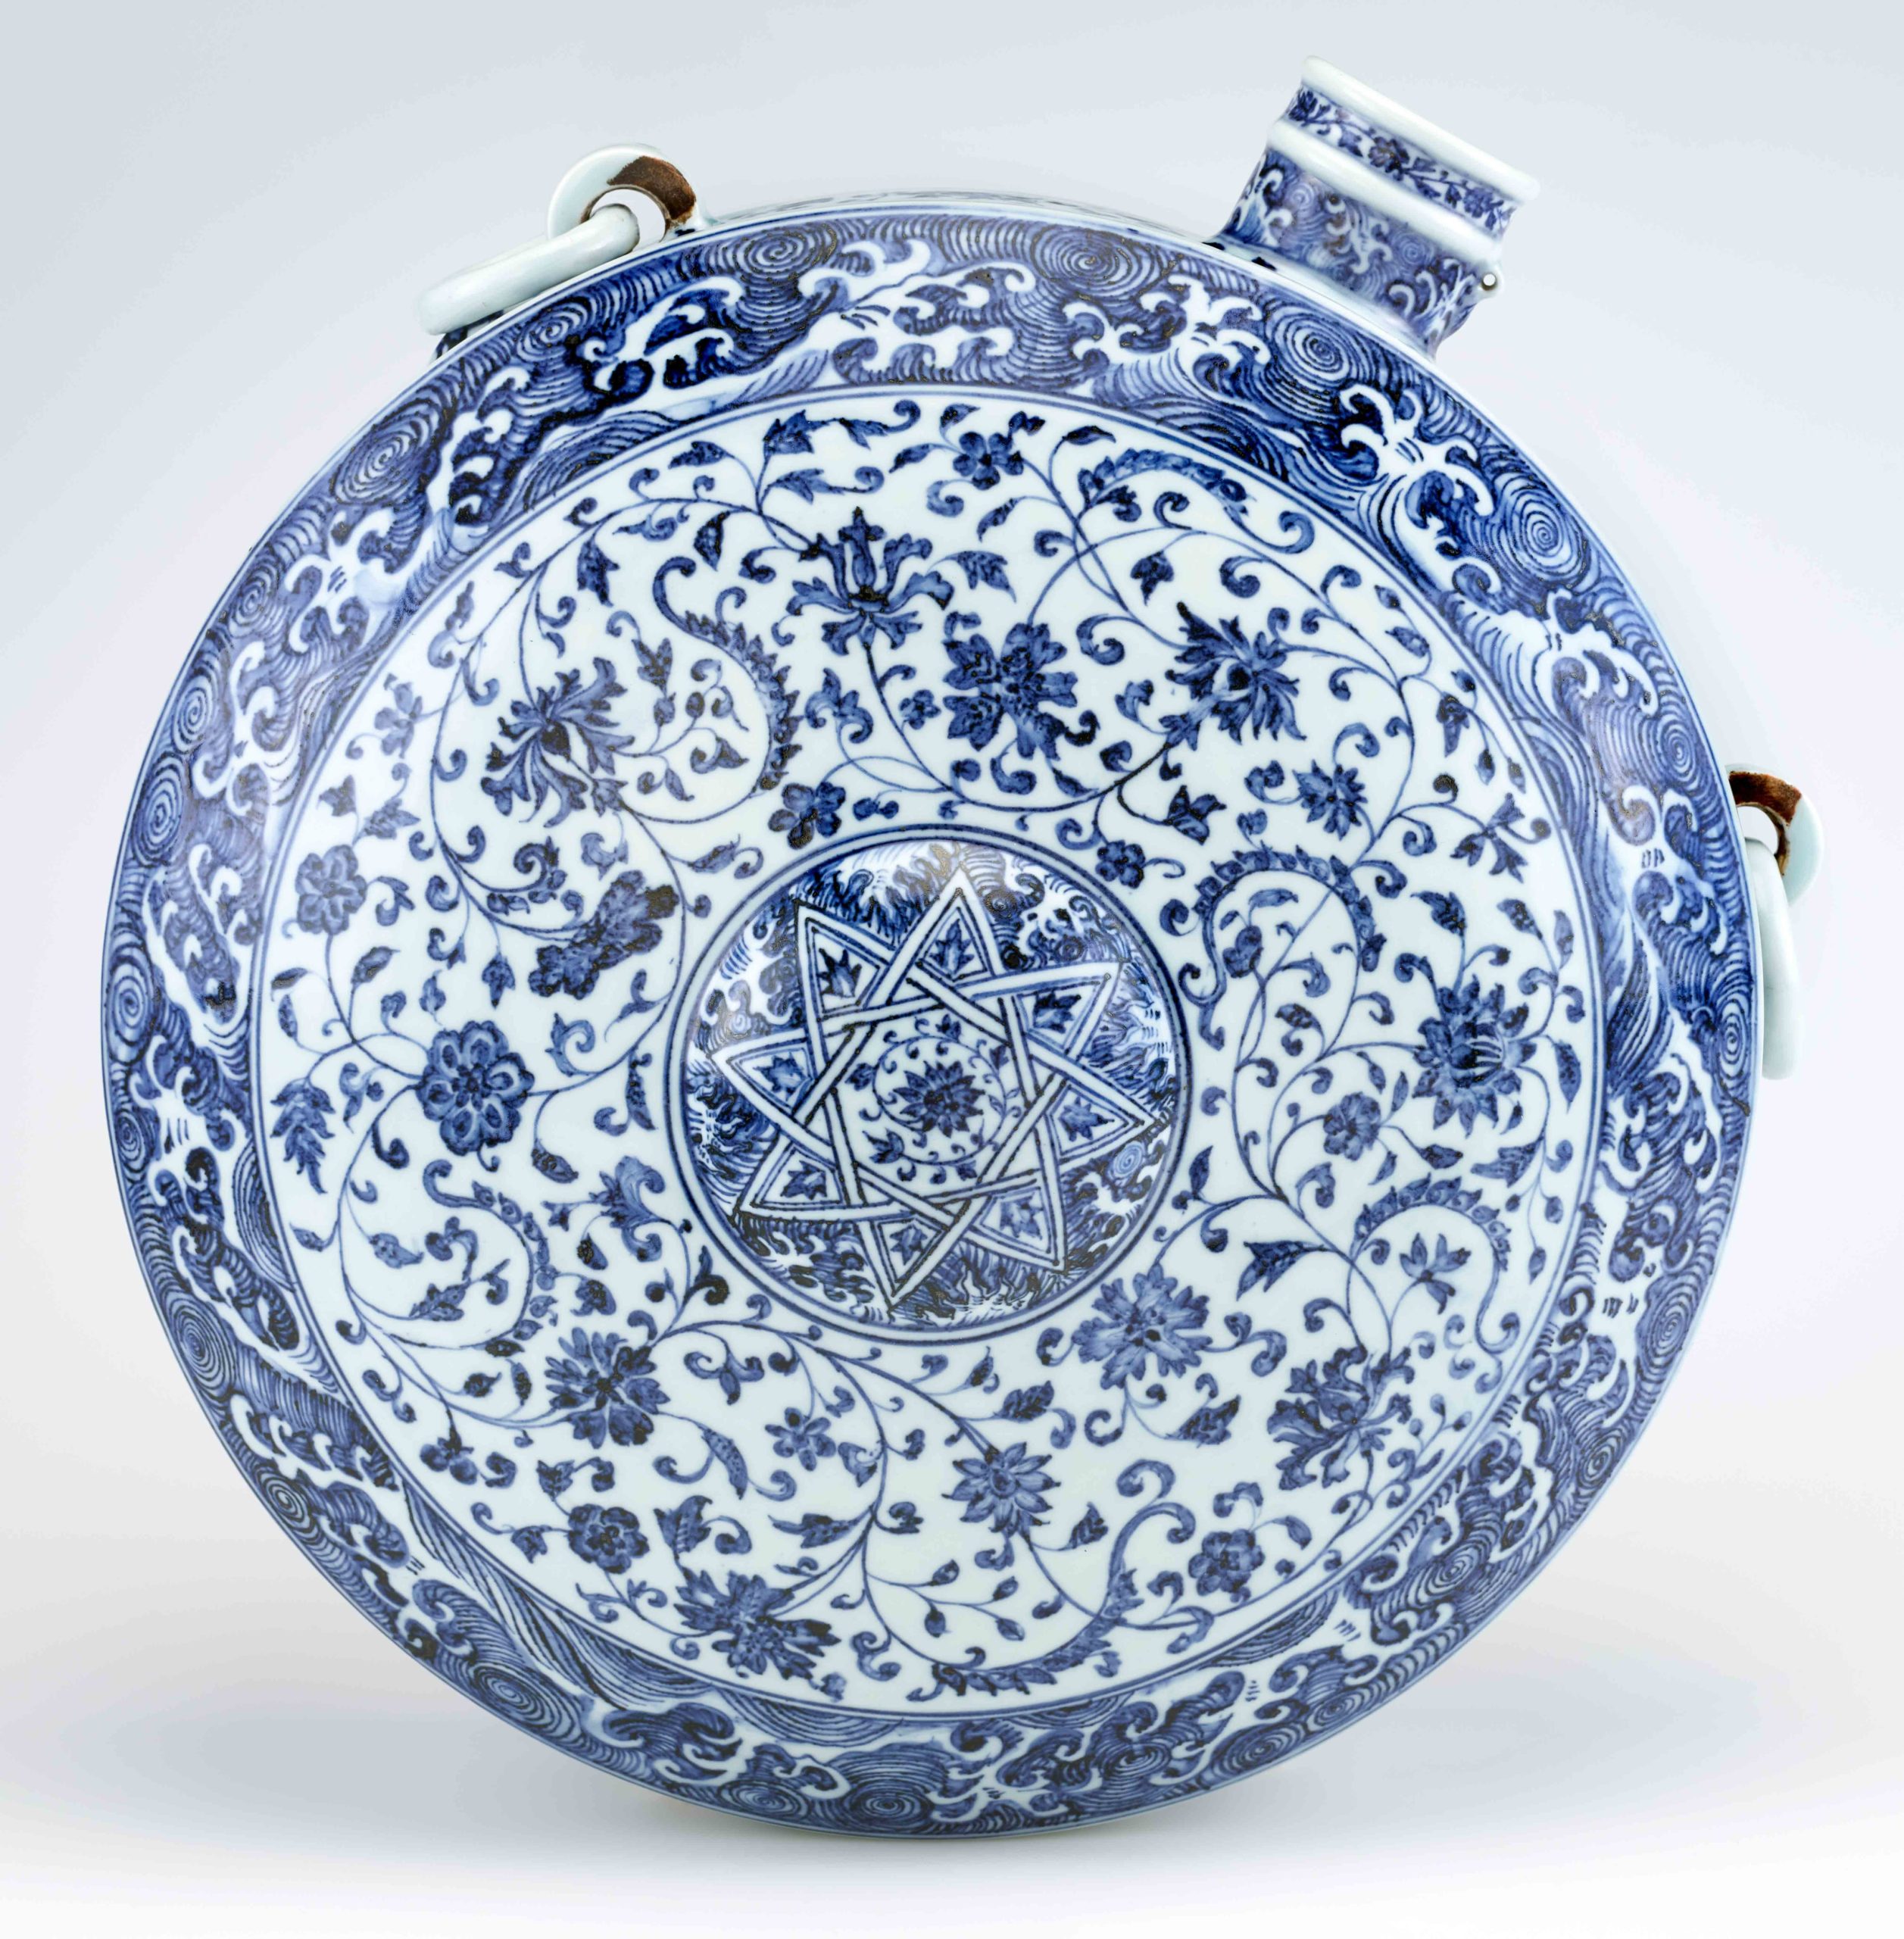 Canteen, Ming dynasty, early 15th century, Jingdezhen ware, porcelain with cobalt pigment under colorless glaze, China, Jiangxi province, Jingdezhen, 46.9 × 41.8 × 21.3 cm (Freer Gallery of Art, Smithsonian Institution, Washington, DC: Purchase — Charles Lang Freer Endowment, F1958.2)